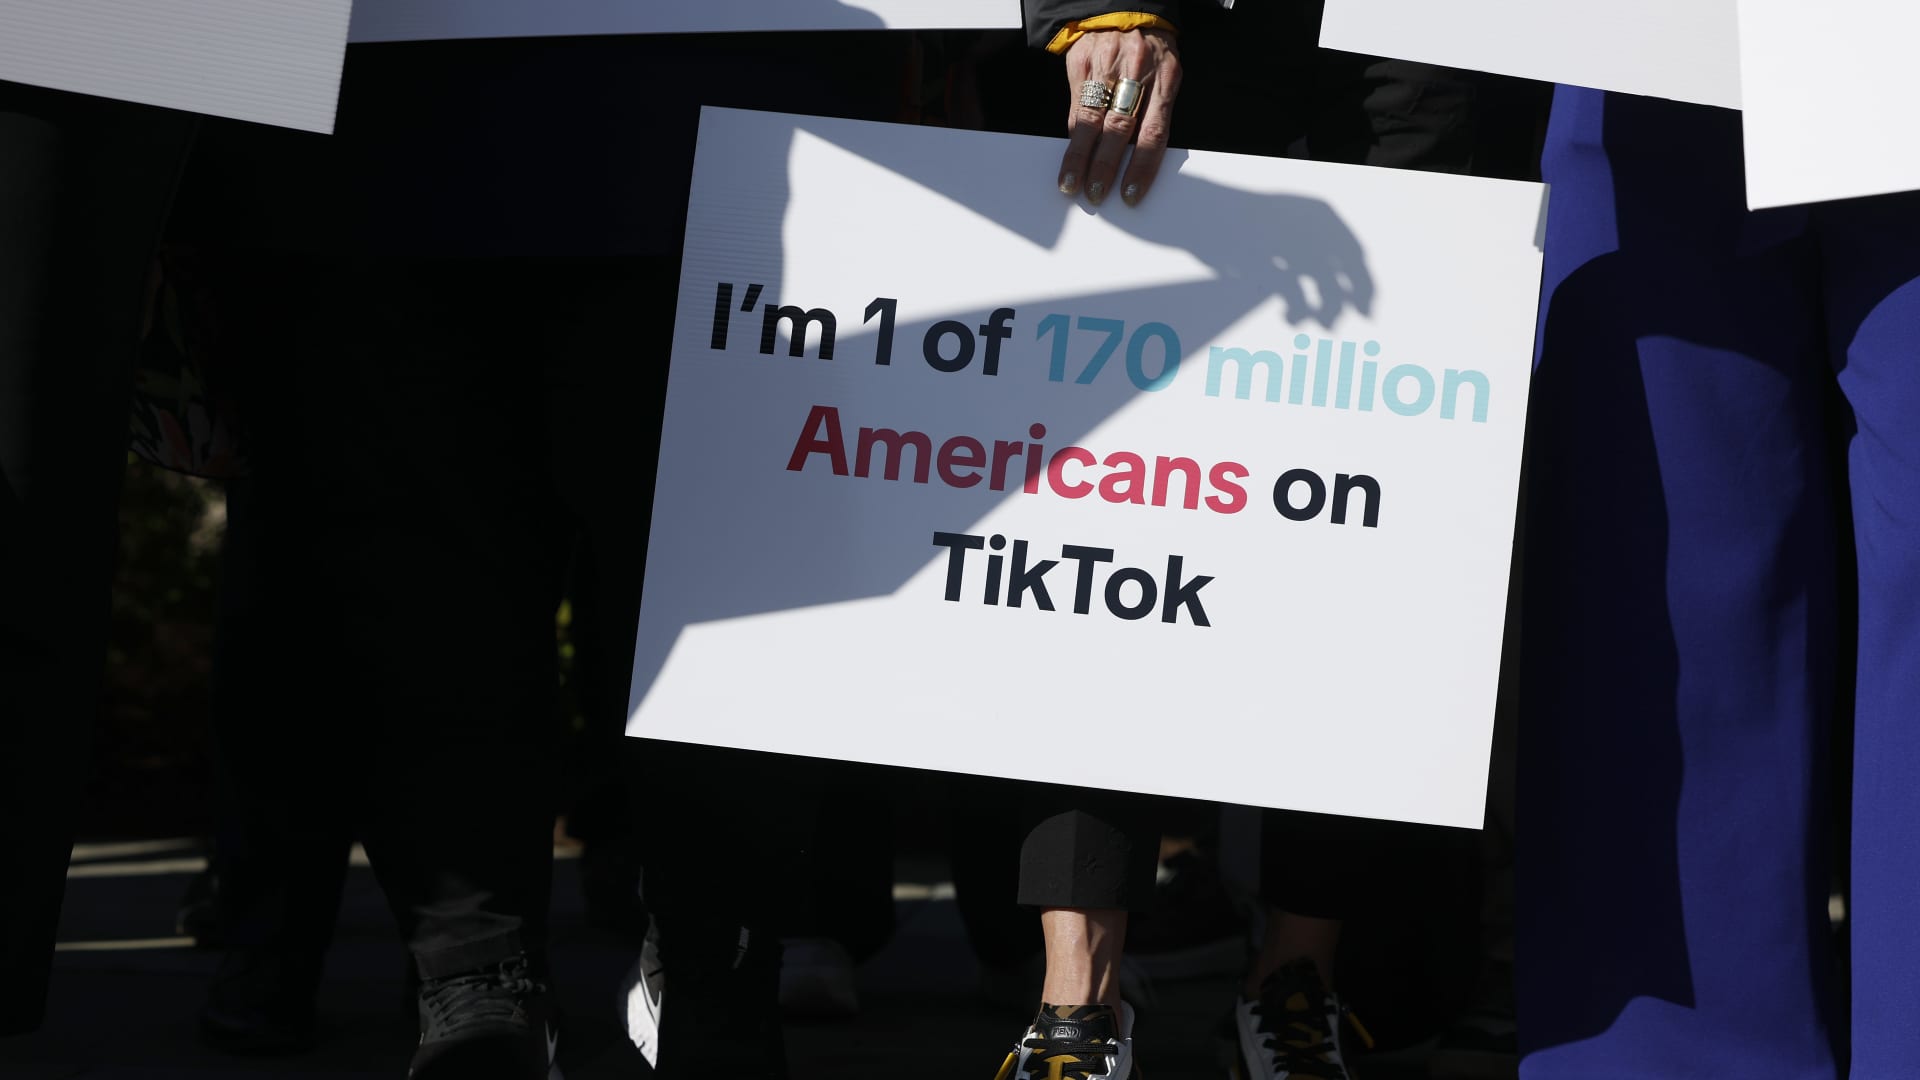 US court will hear challenges to a possible TikTok ban in September